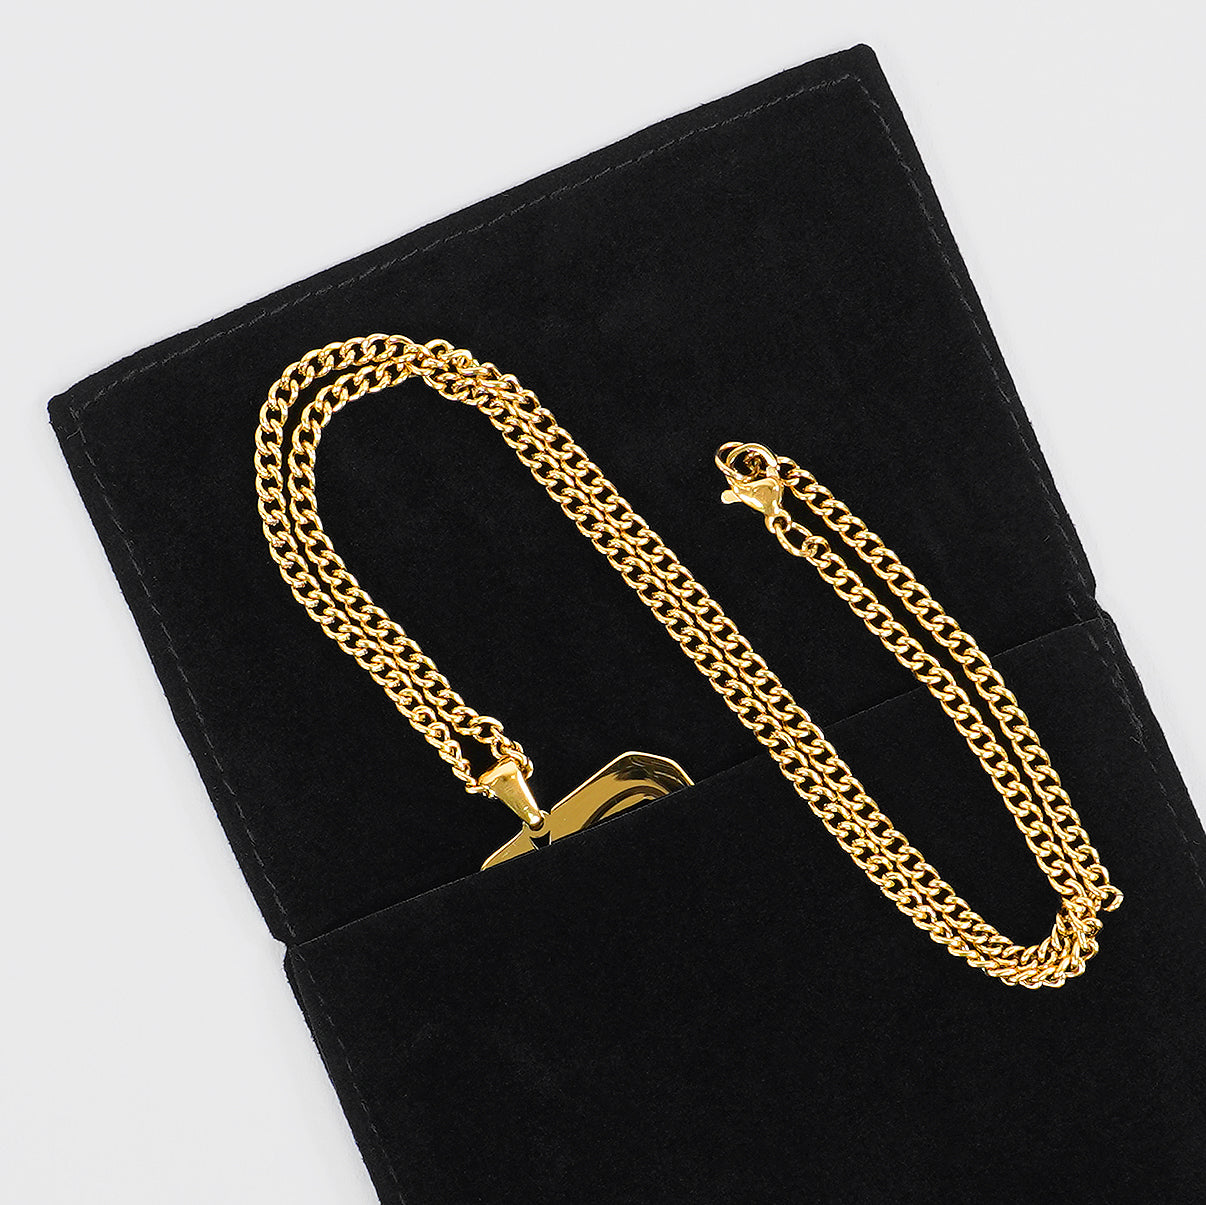 43 Number Pendant with Chain Necklace - Gold Plated Stainless Steel